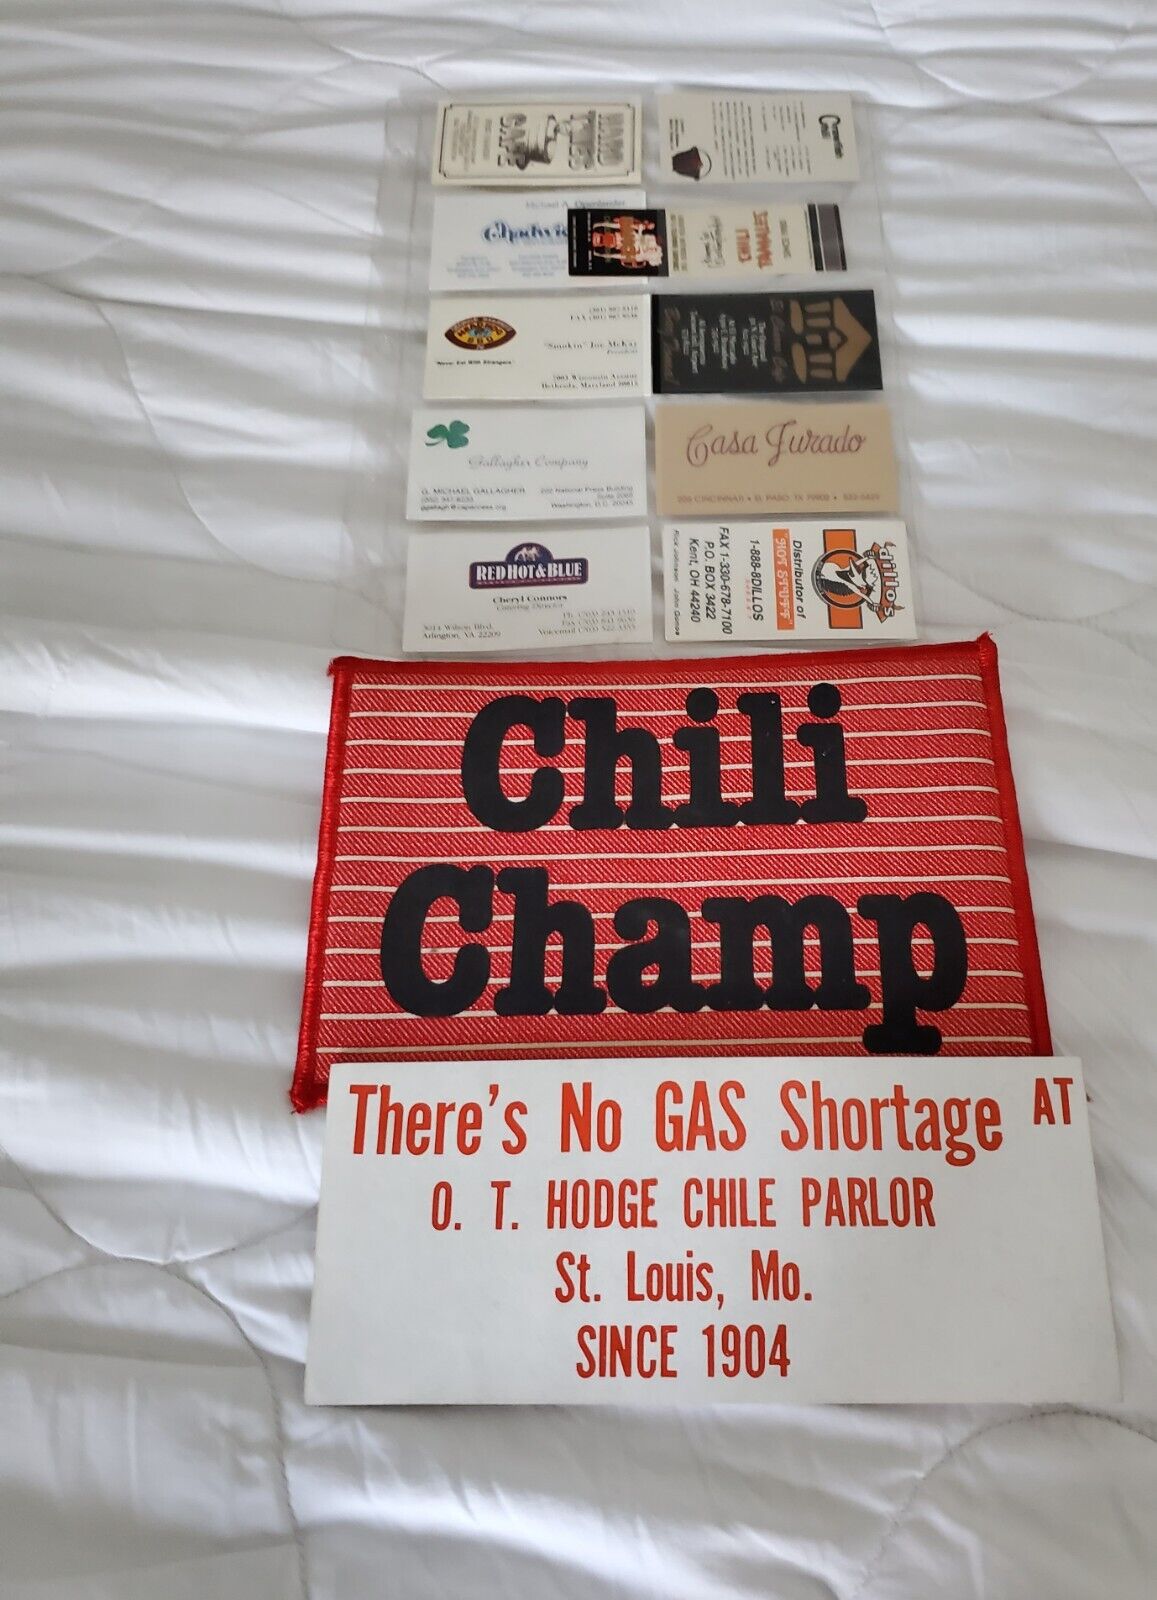 ALBUM RELATING TO CHILI, LOT OVER 40: ;PHOTO'S: RECIPES: POST CARDS, ALMANAC: F+